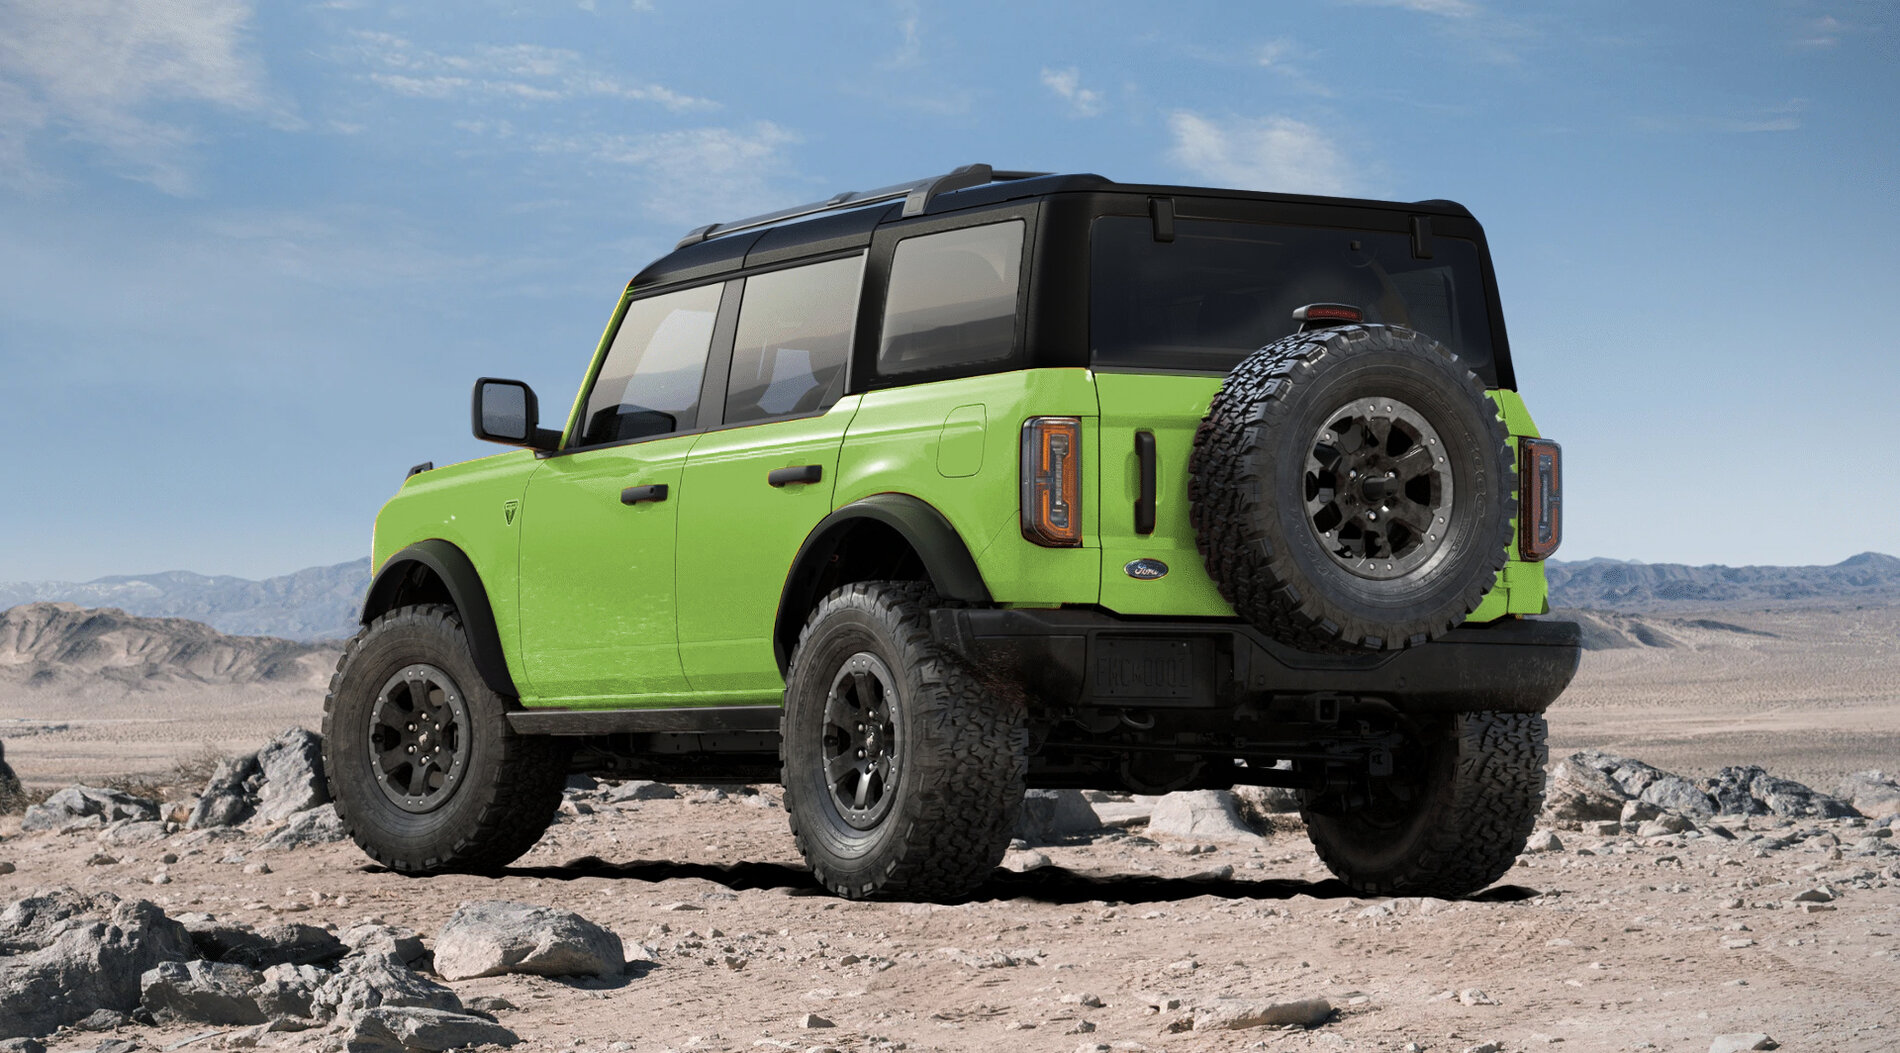 Ford Bronco Rendering: 2022 Boxwood Green and Cactus Gray OBX with 33s + white tops + shadow black tops Grabber